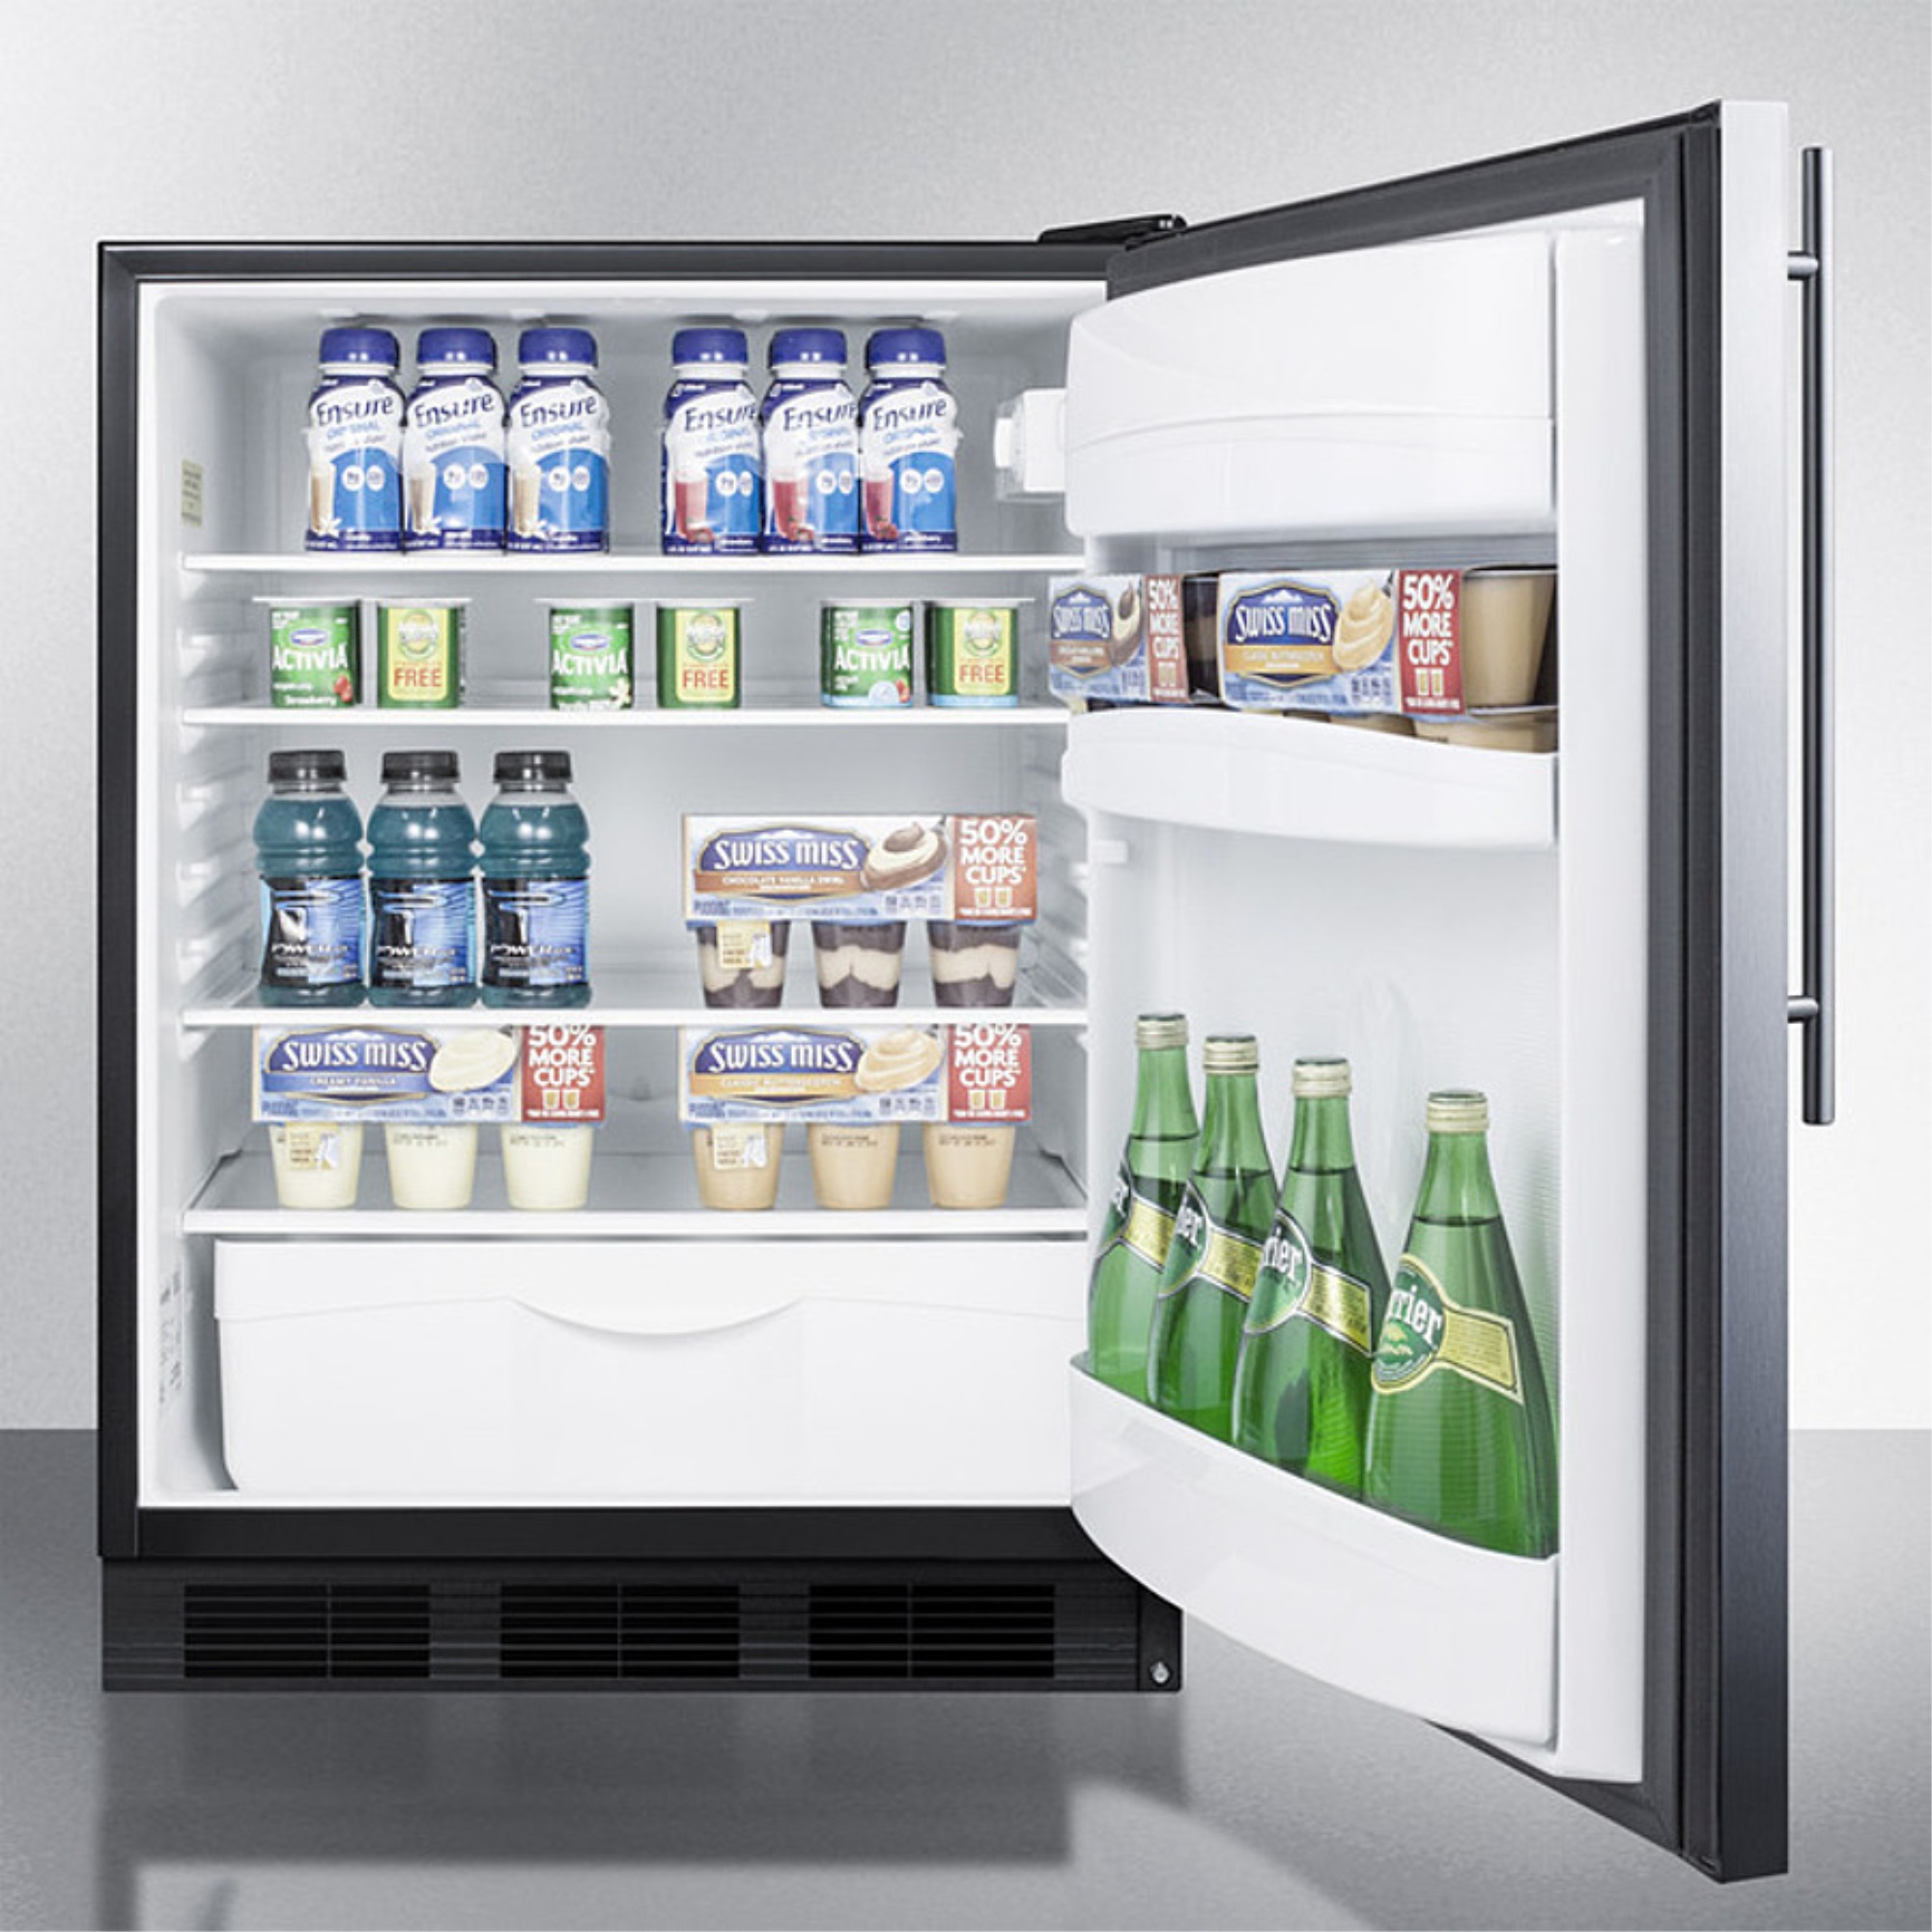 AccuCold ADA compliant all-refrigerator for built-in general purpose use, auto defrost w/stainless steel wrapped door, thin handle, and